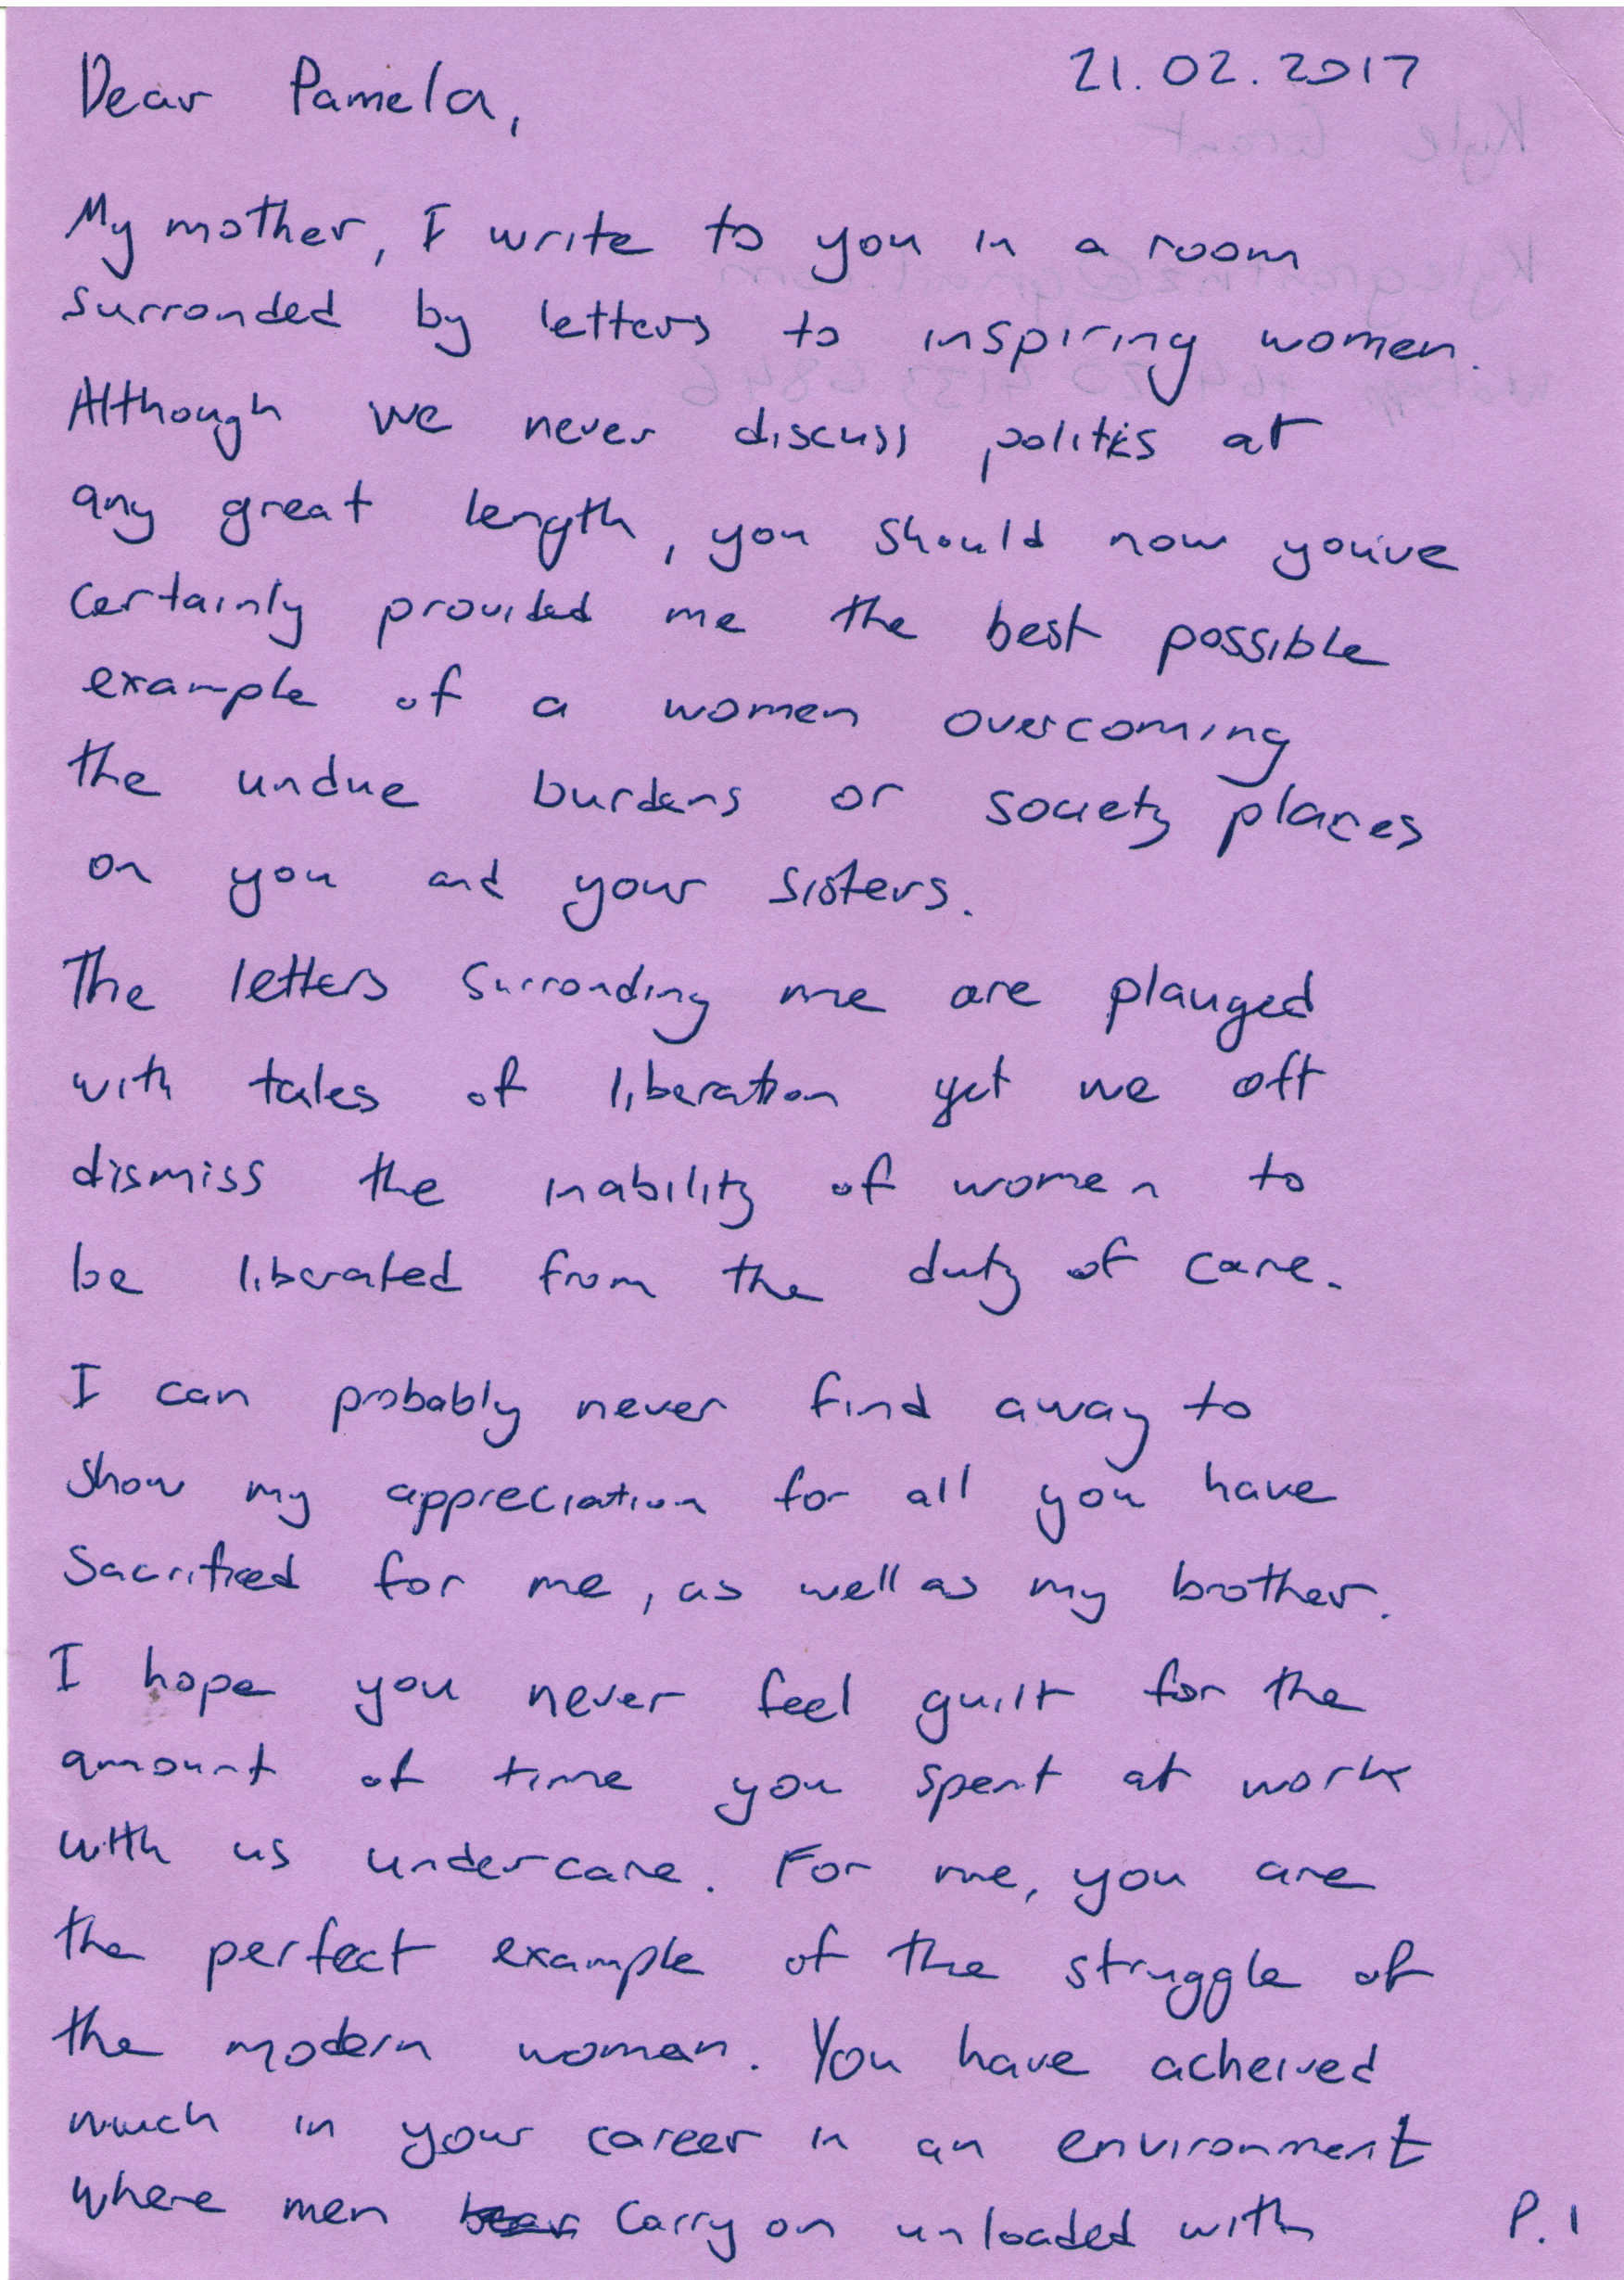 Scan of the letter